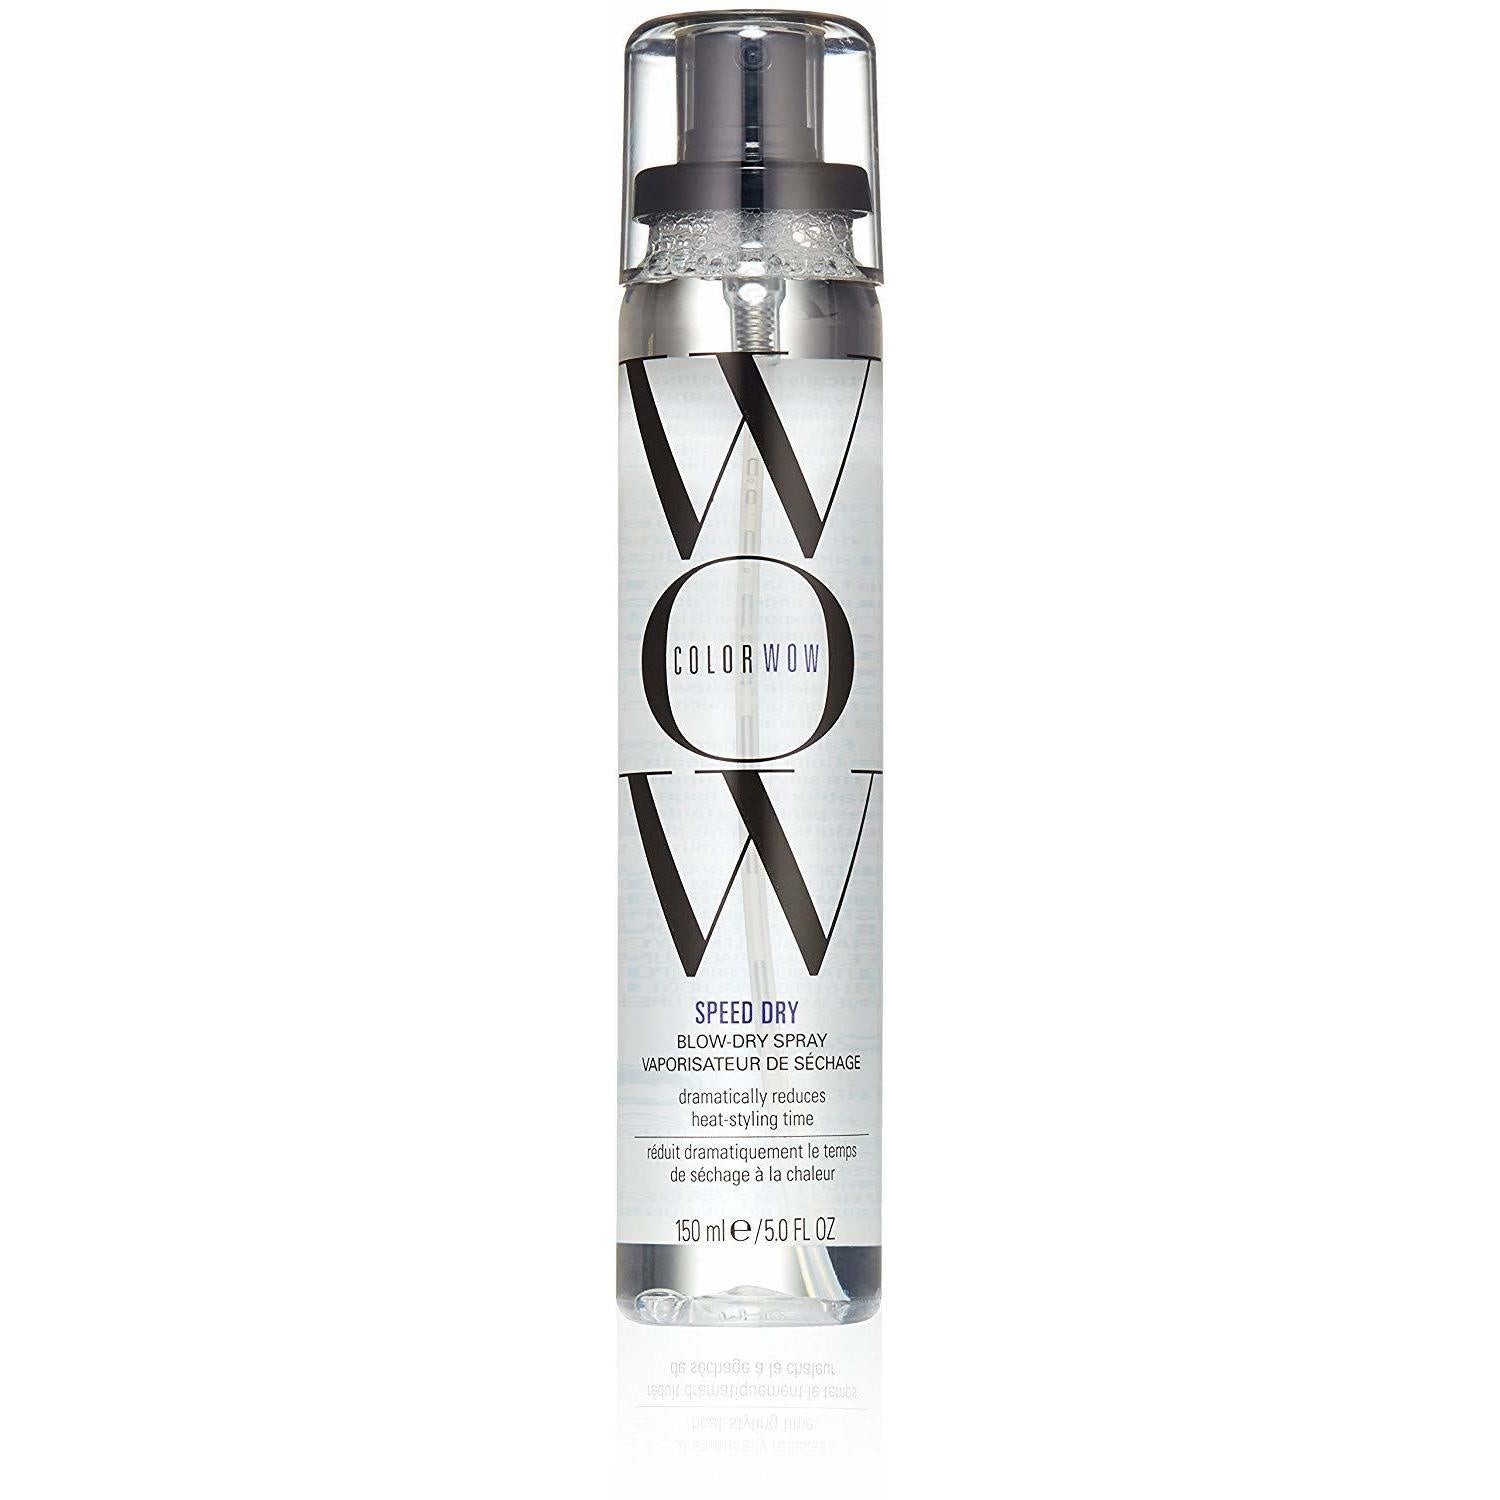  COLOR WOW Speed Dry Spray - Cut Blow Dry Time 30